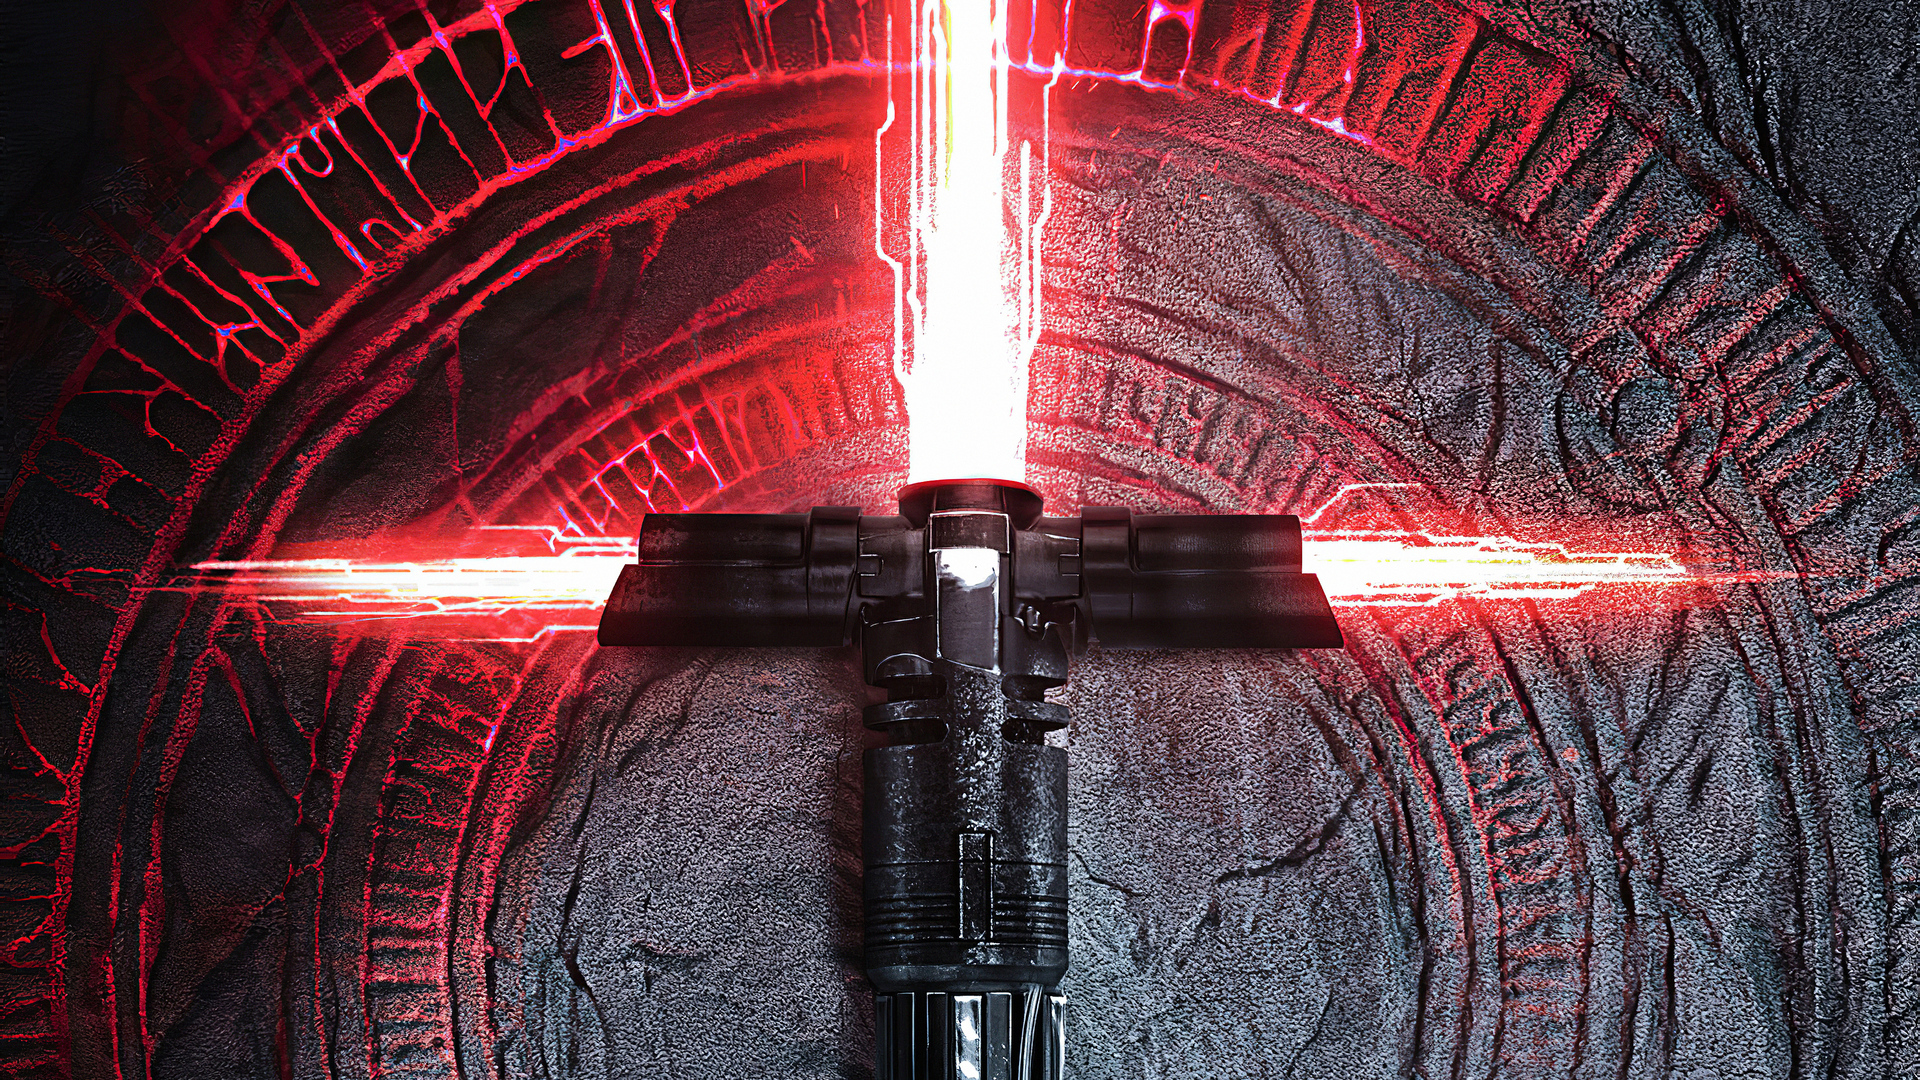 1034015 illustration Star Wars digital art space lightsaber darkness  screenshot computer wallpaper special effects outer space  Rare Gallery  HD Wallpapers